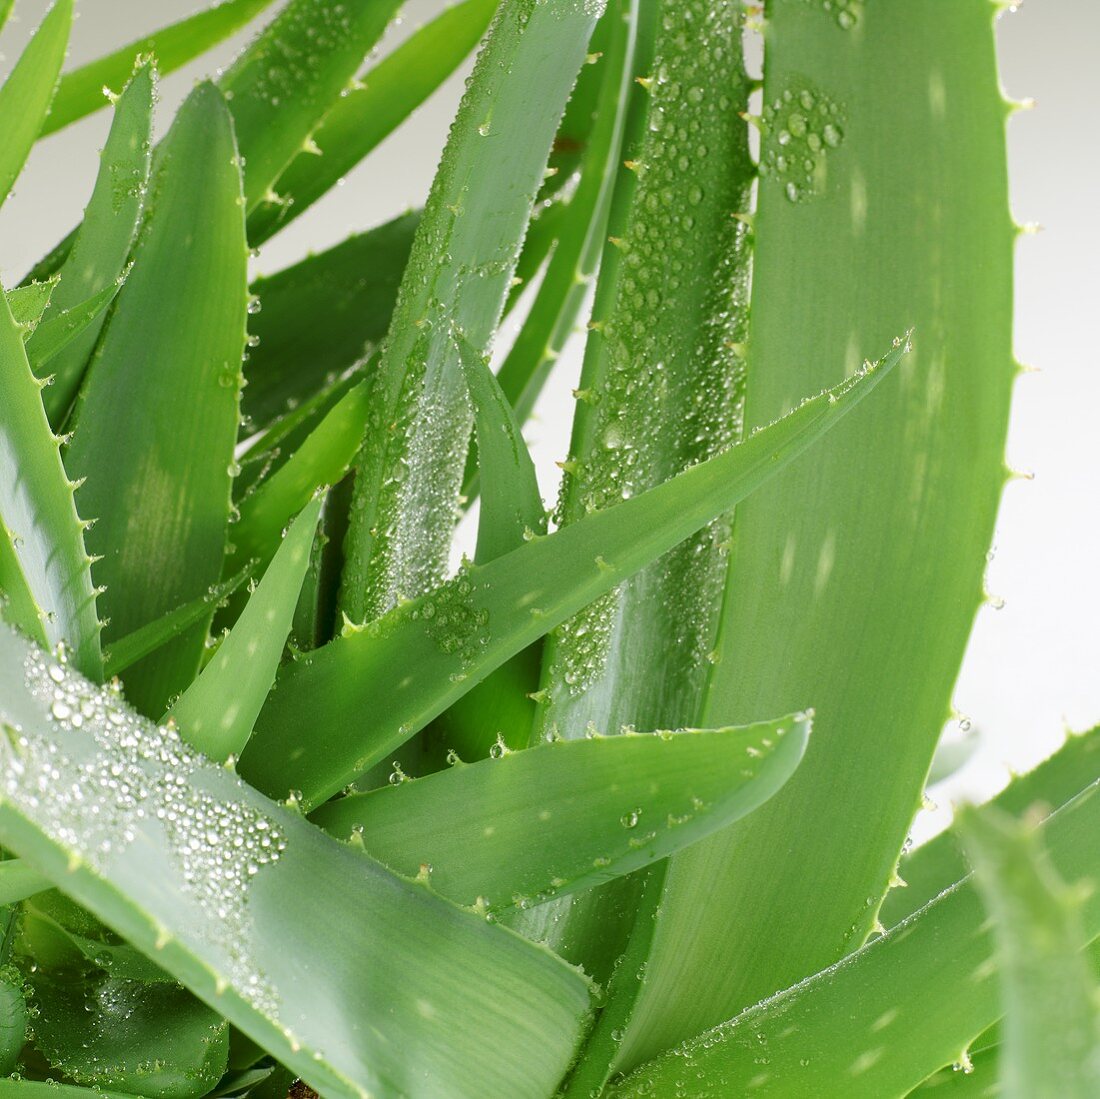 Aloe vera plant with drops of water (detail)